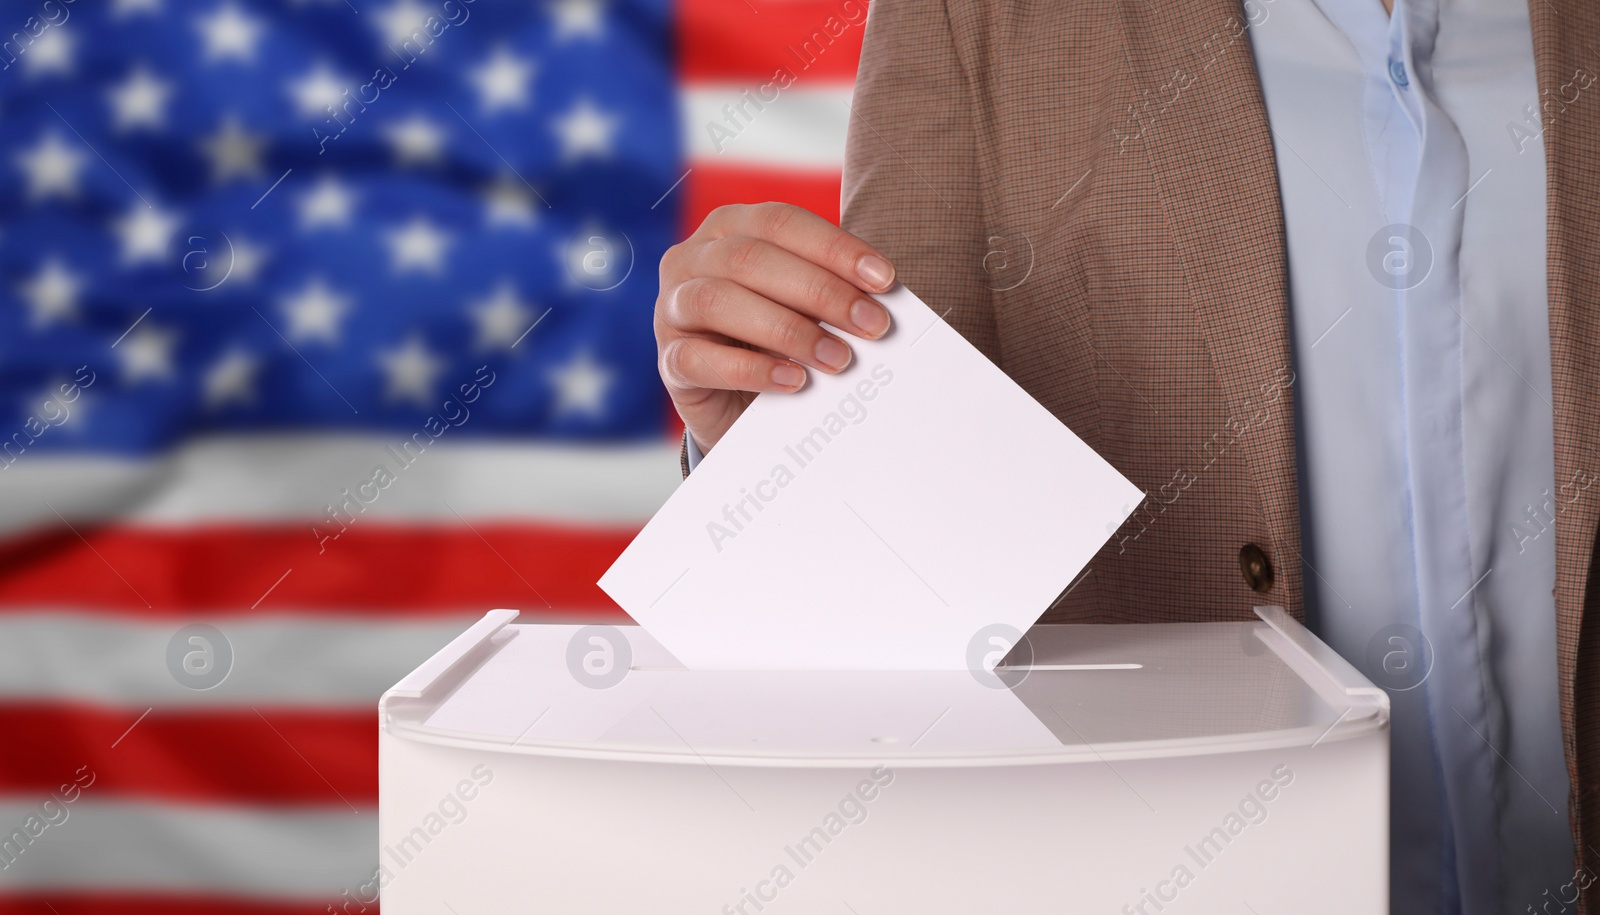 Image of Election in USA. Woman putting her vote into ballot box against national flag of United States, closeup. Banner design